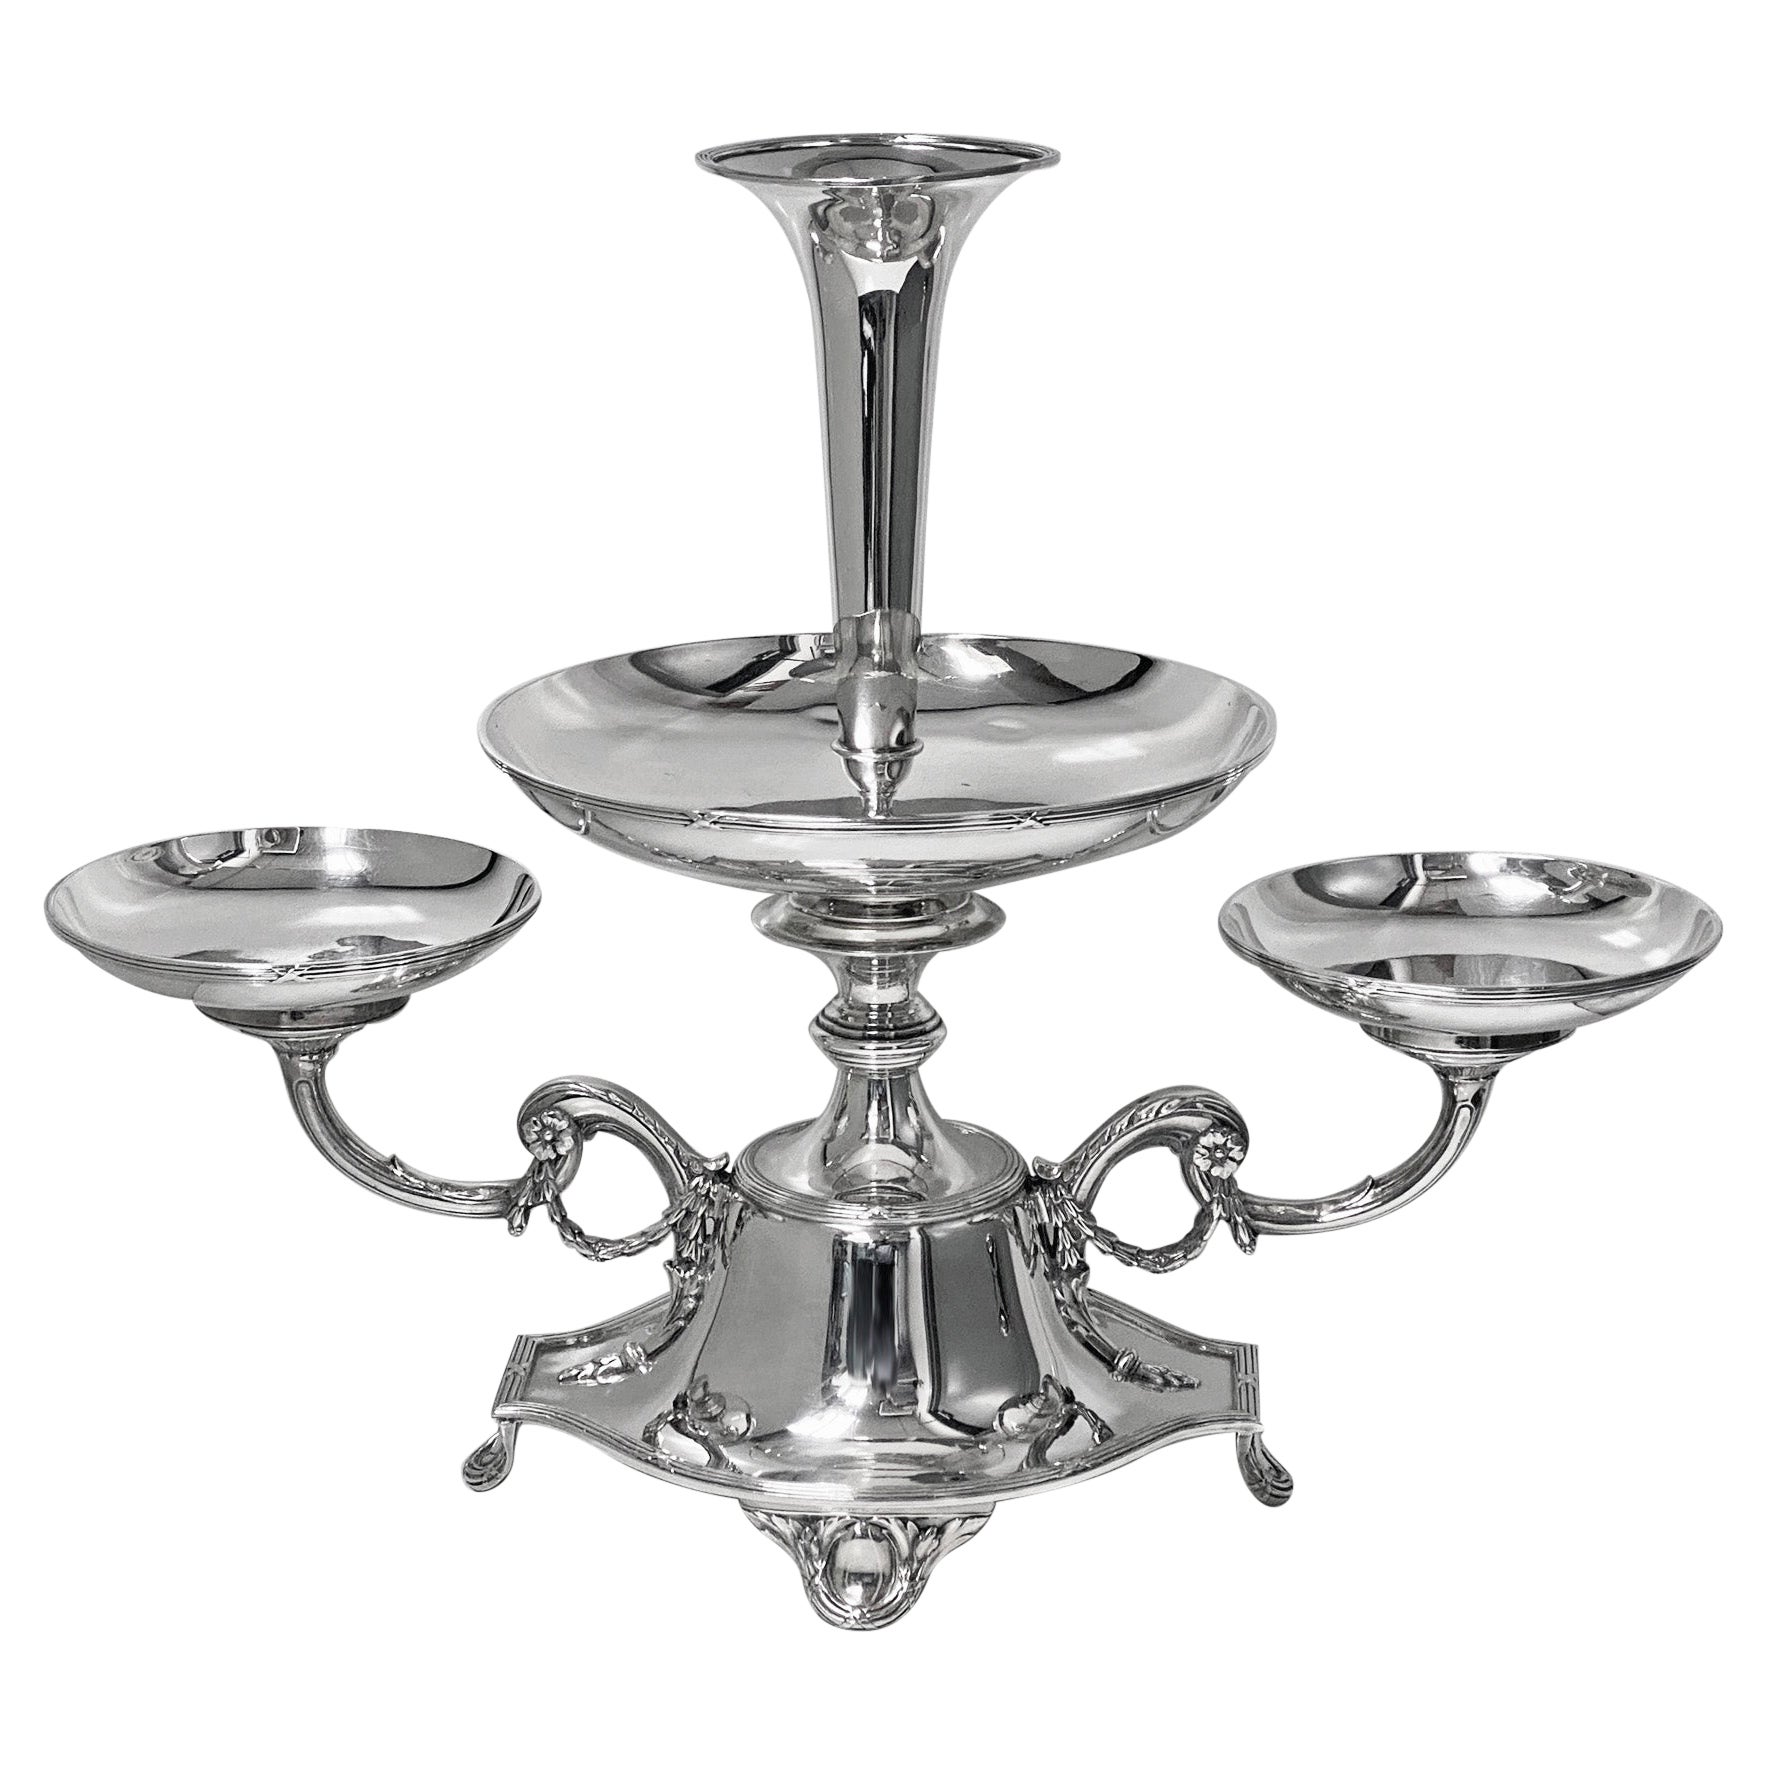 Elkington Silver Plate Centerpiece Epergne for Fruit and Flowers, 1925